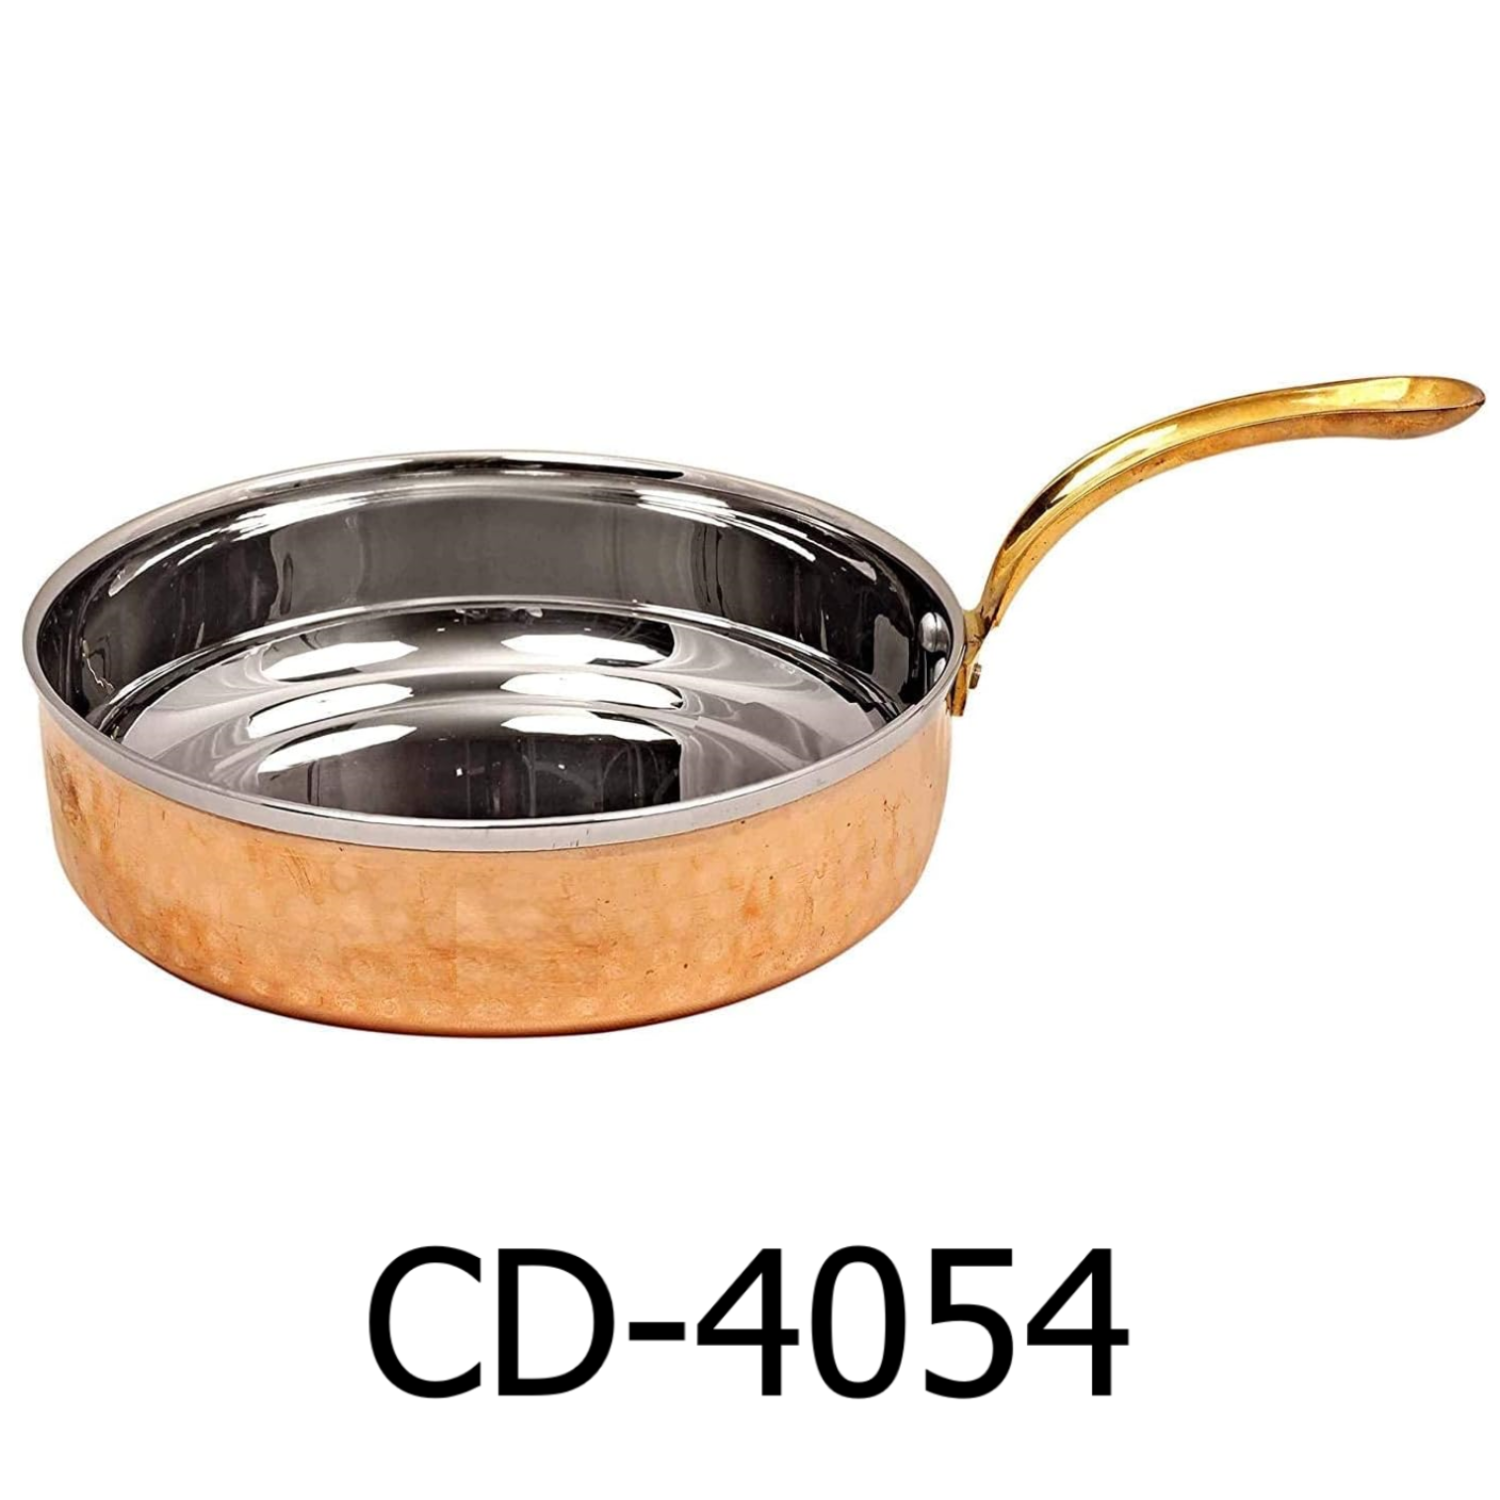 5 Copper/Stainless Steel Hammered Mini Fry Pan with Brass Handle